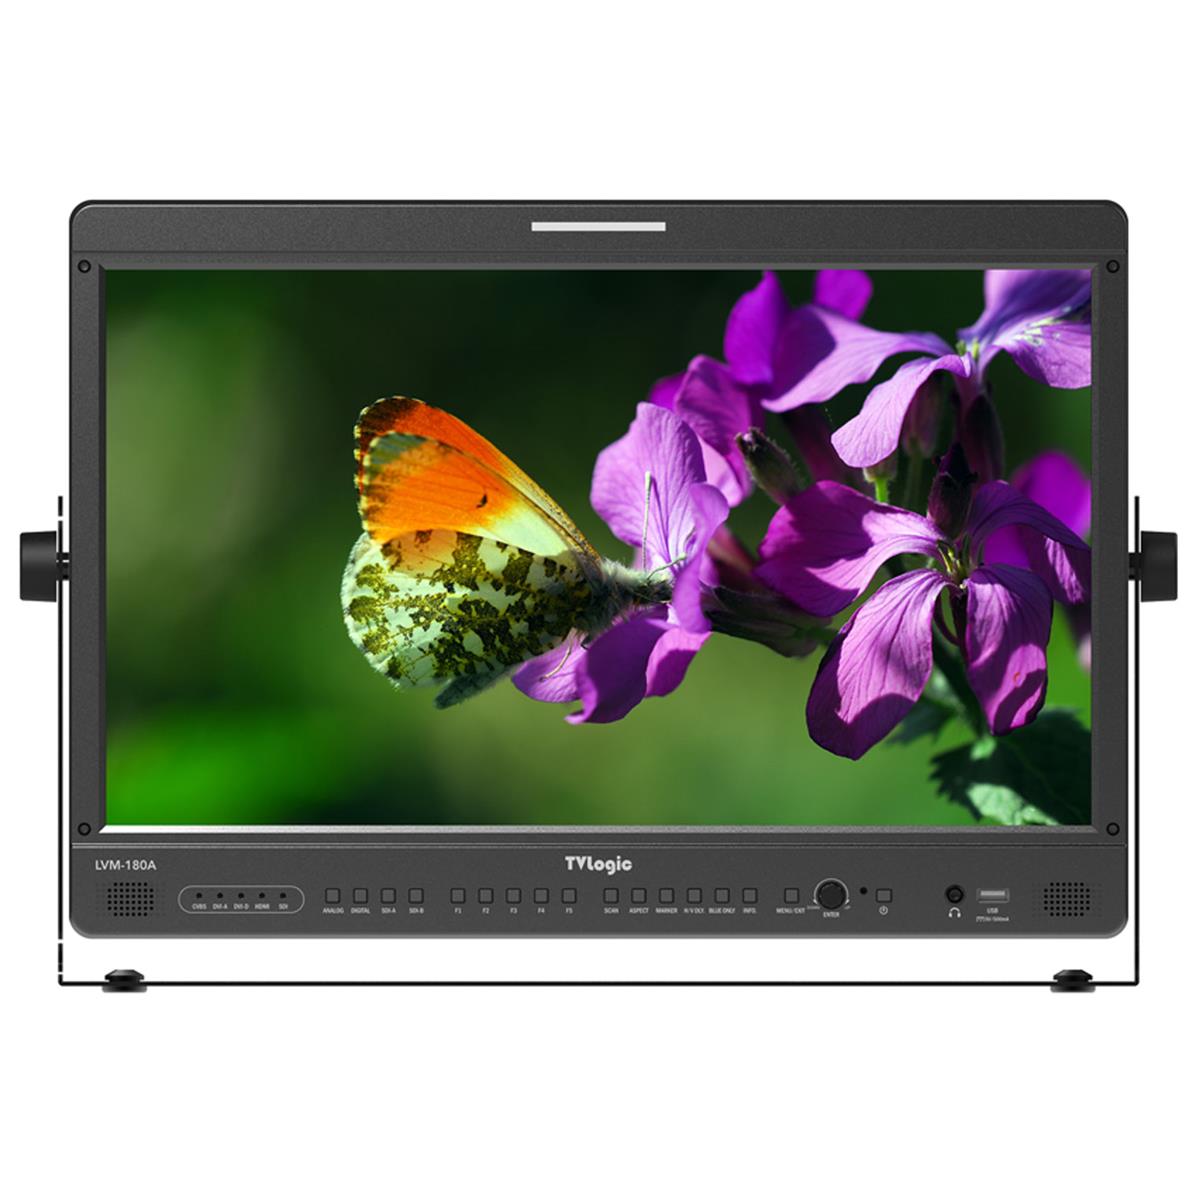 

TV Logic LVM-180A 18.5" 16:9 Full HD IPS Wide-View LCD Broadcast Monitor